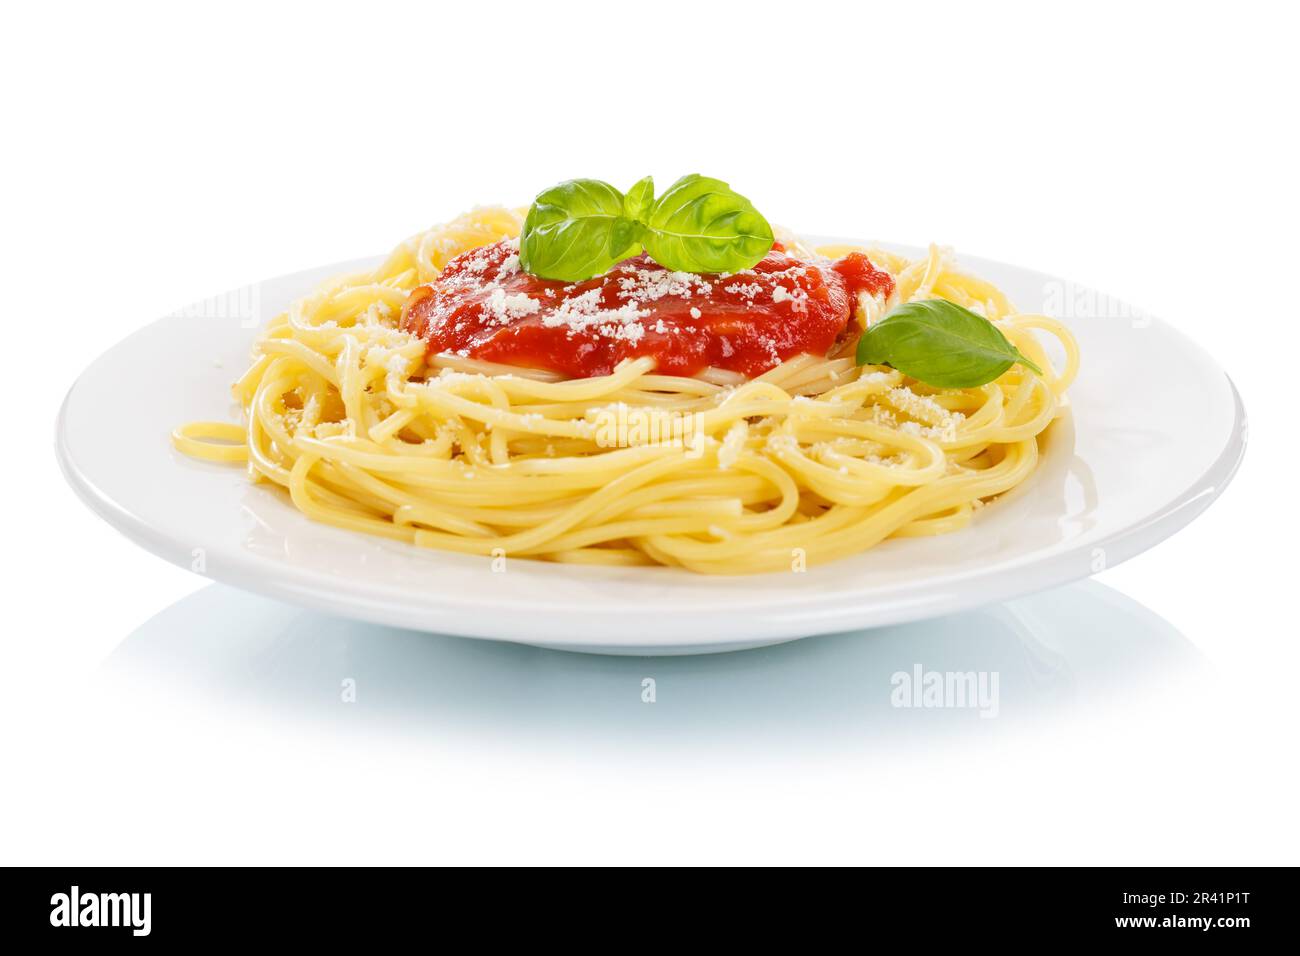 Spaghetti exempted isolated eat italian pasta lunch dish with tomato sauce in Stuttgart, Germany Stock Photo